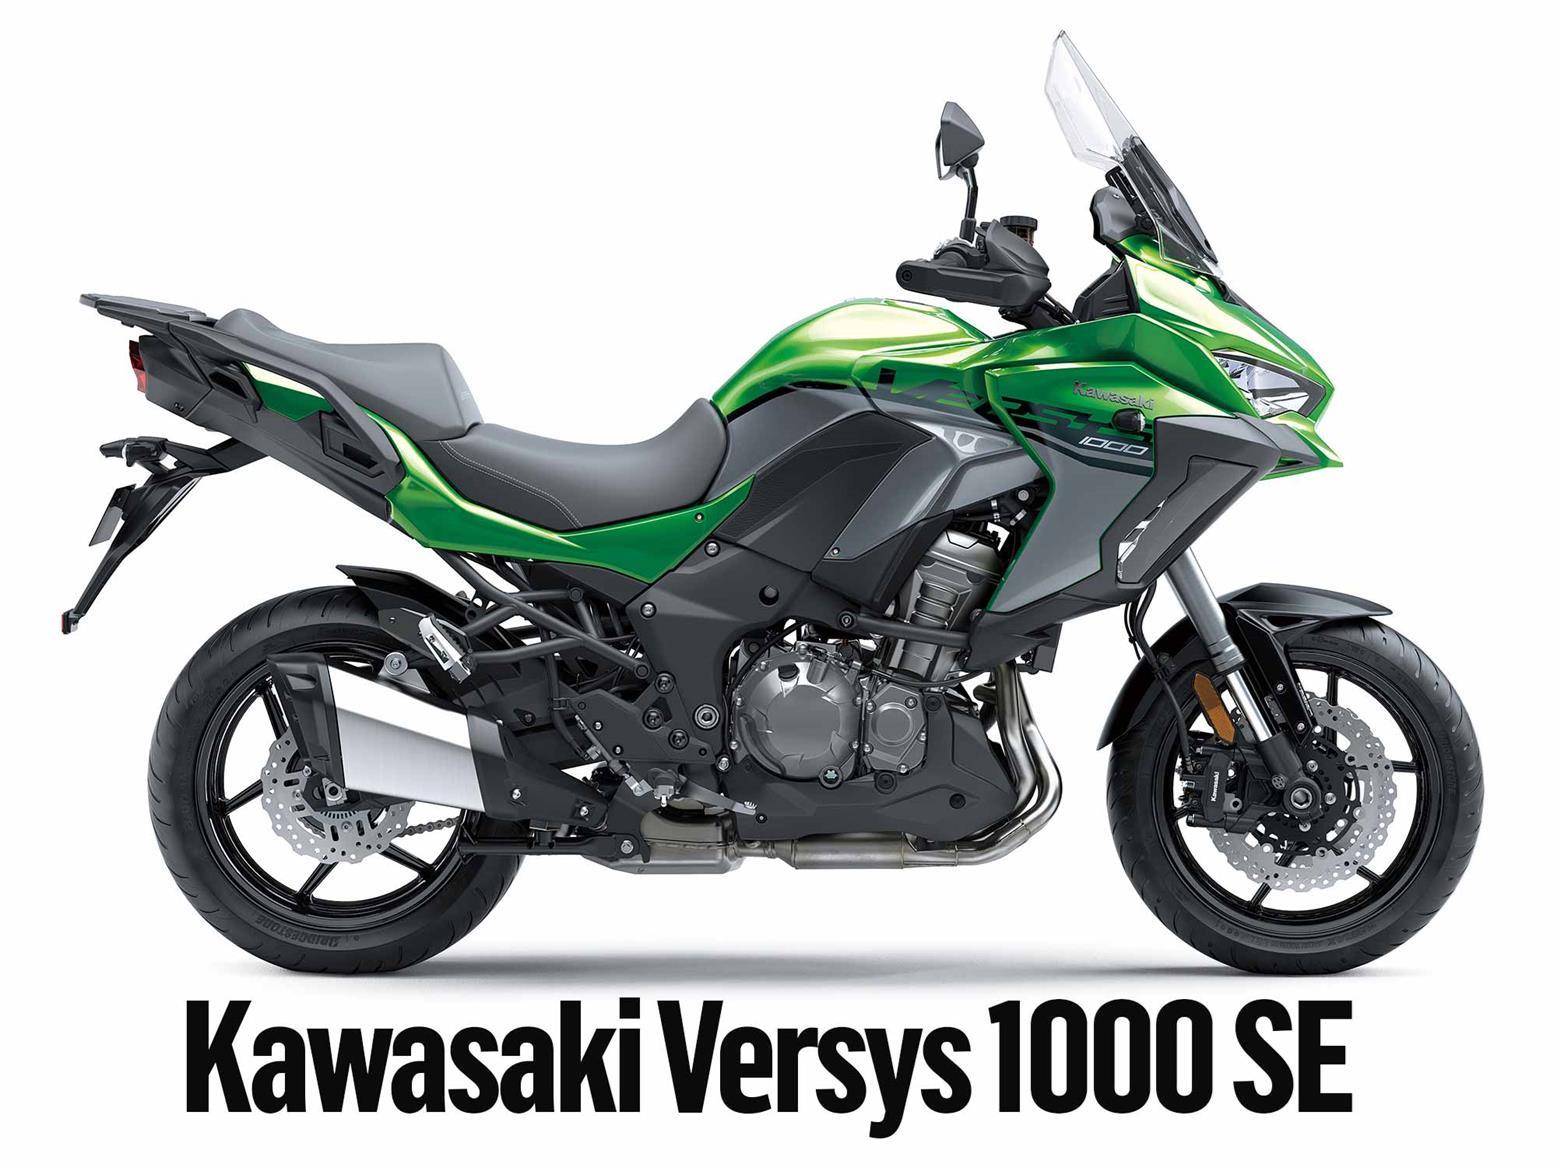 Read MCN's detailed Kawasaki Versys 1000 SE long-term test here